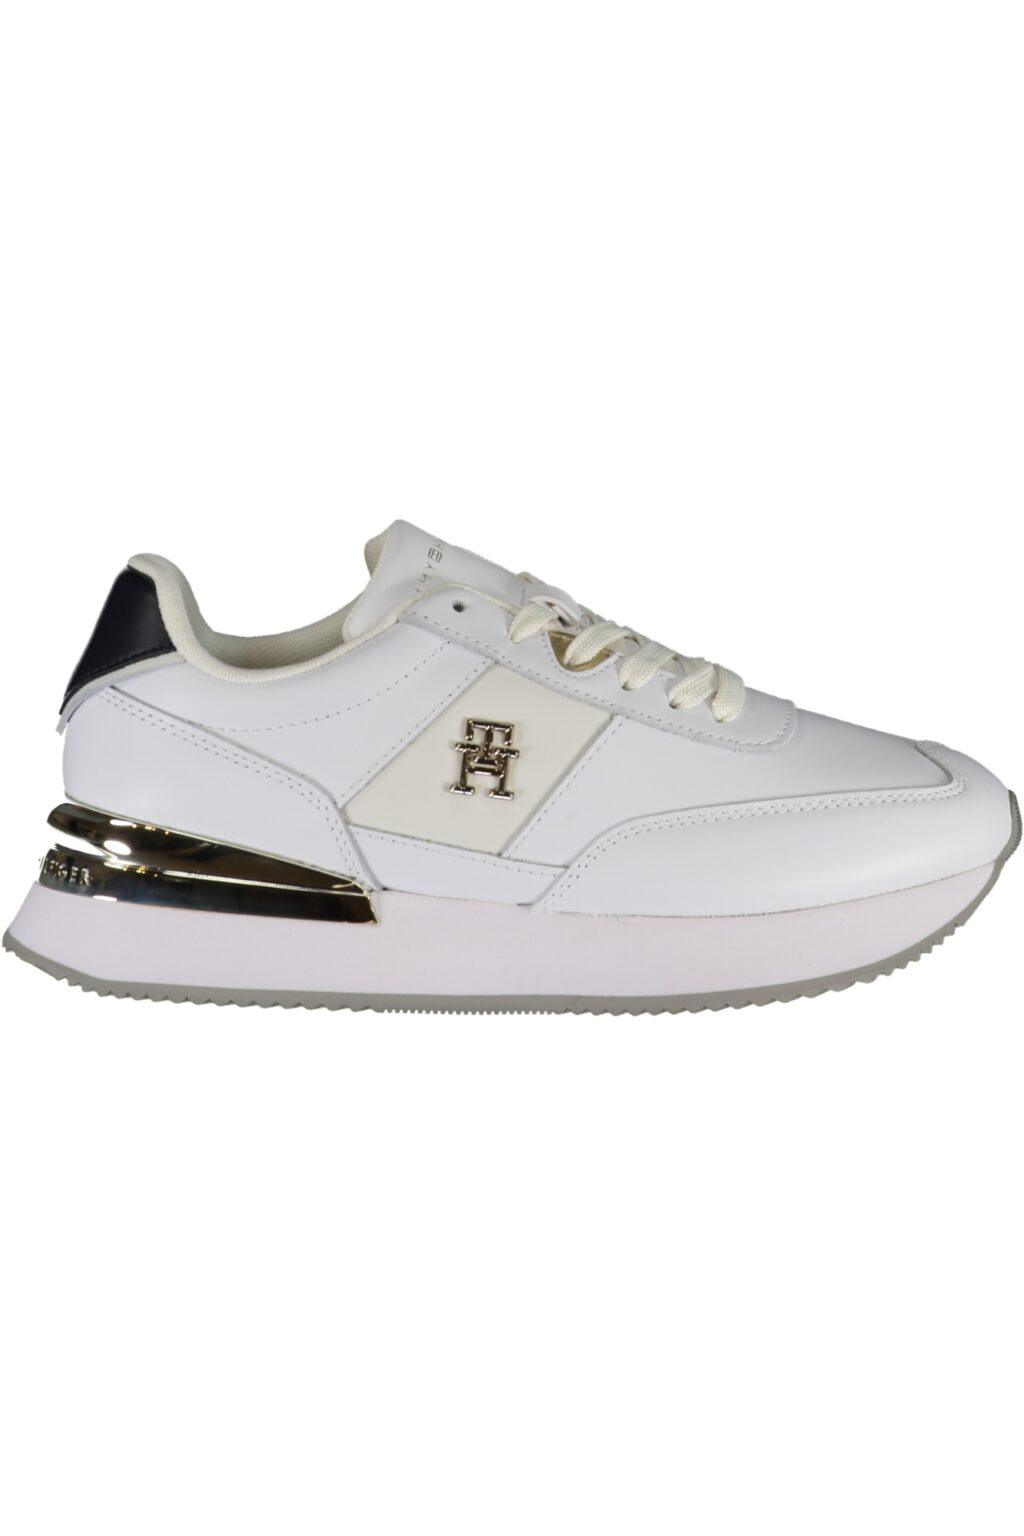 TOMMY HILFIGER WHITE WOMEN'S SPORTS SHOES FW0FW07306F_BIYBS